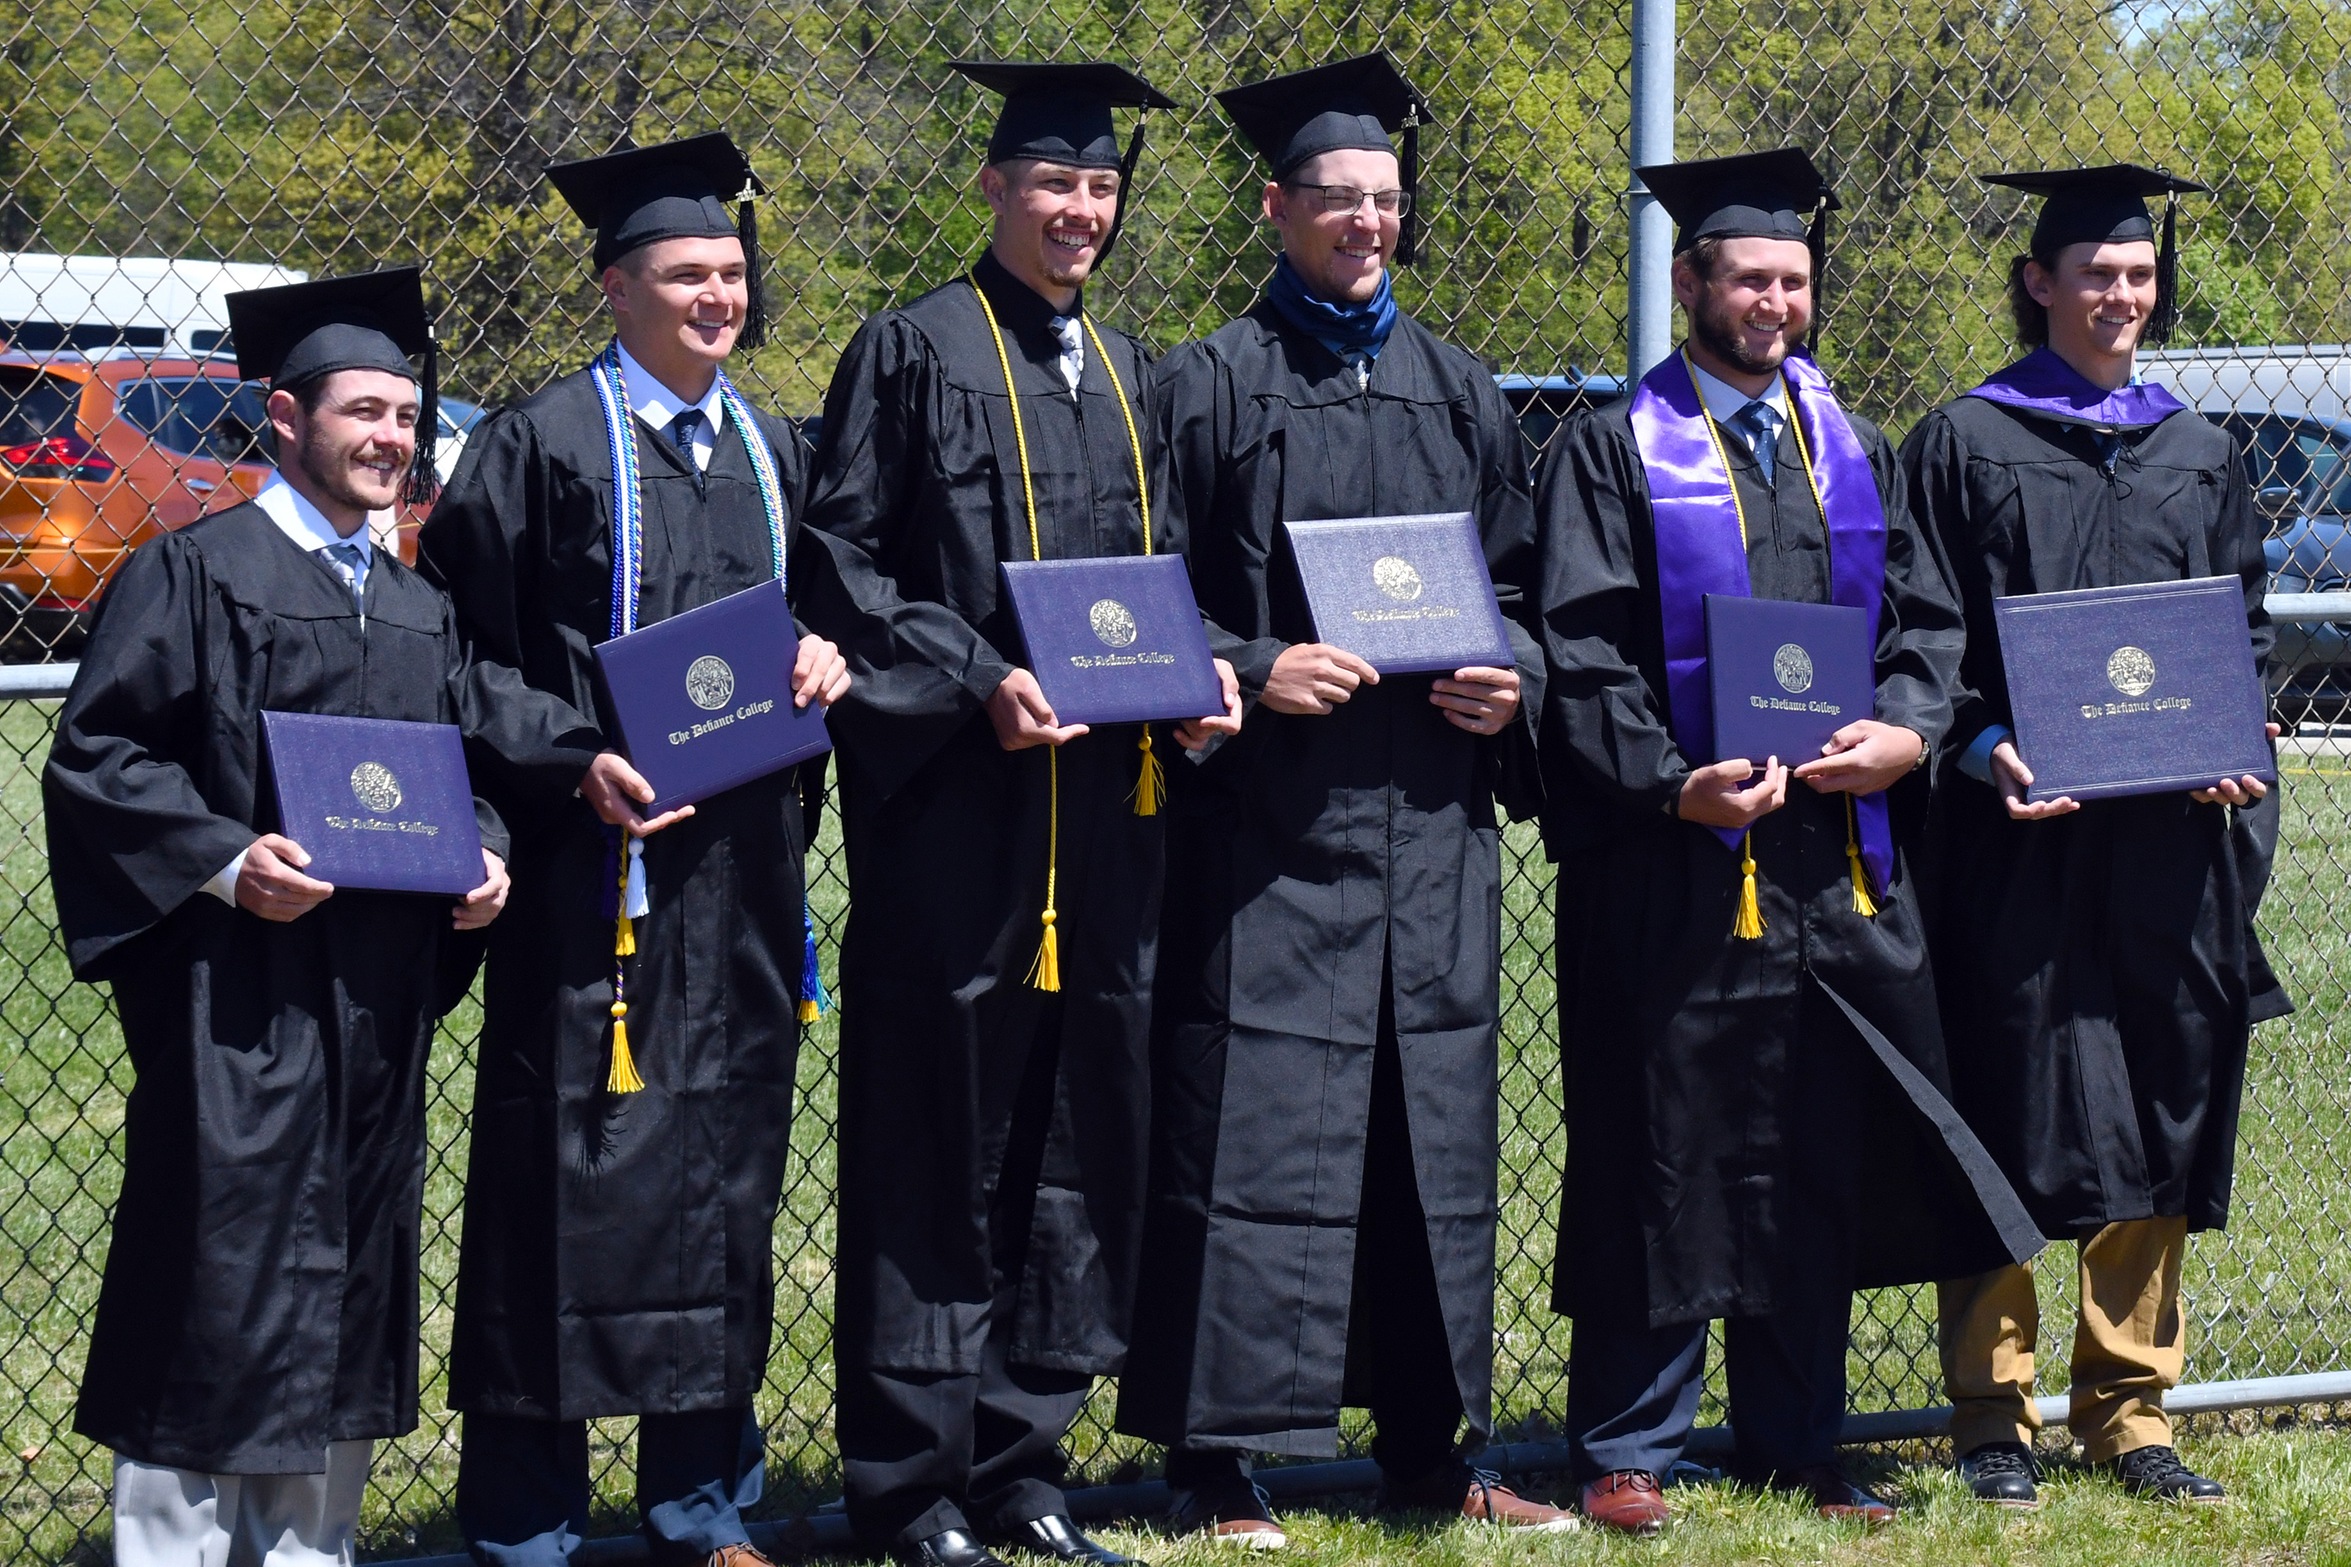 Forty-one students associated with athletics earn degrees